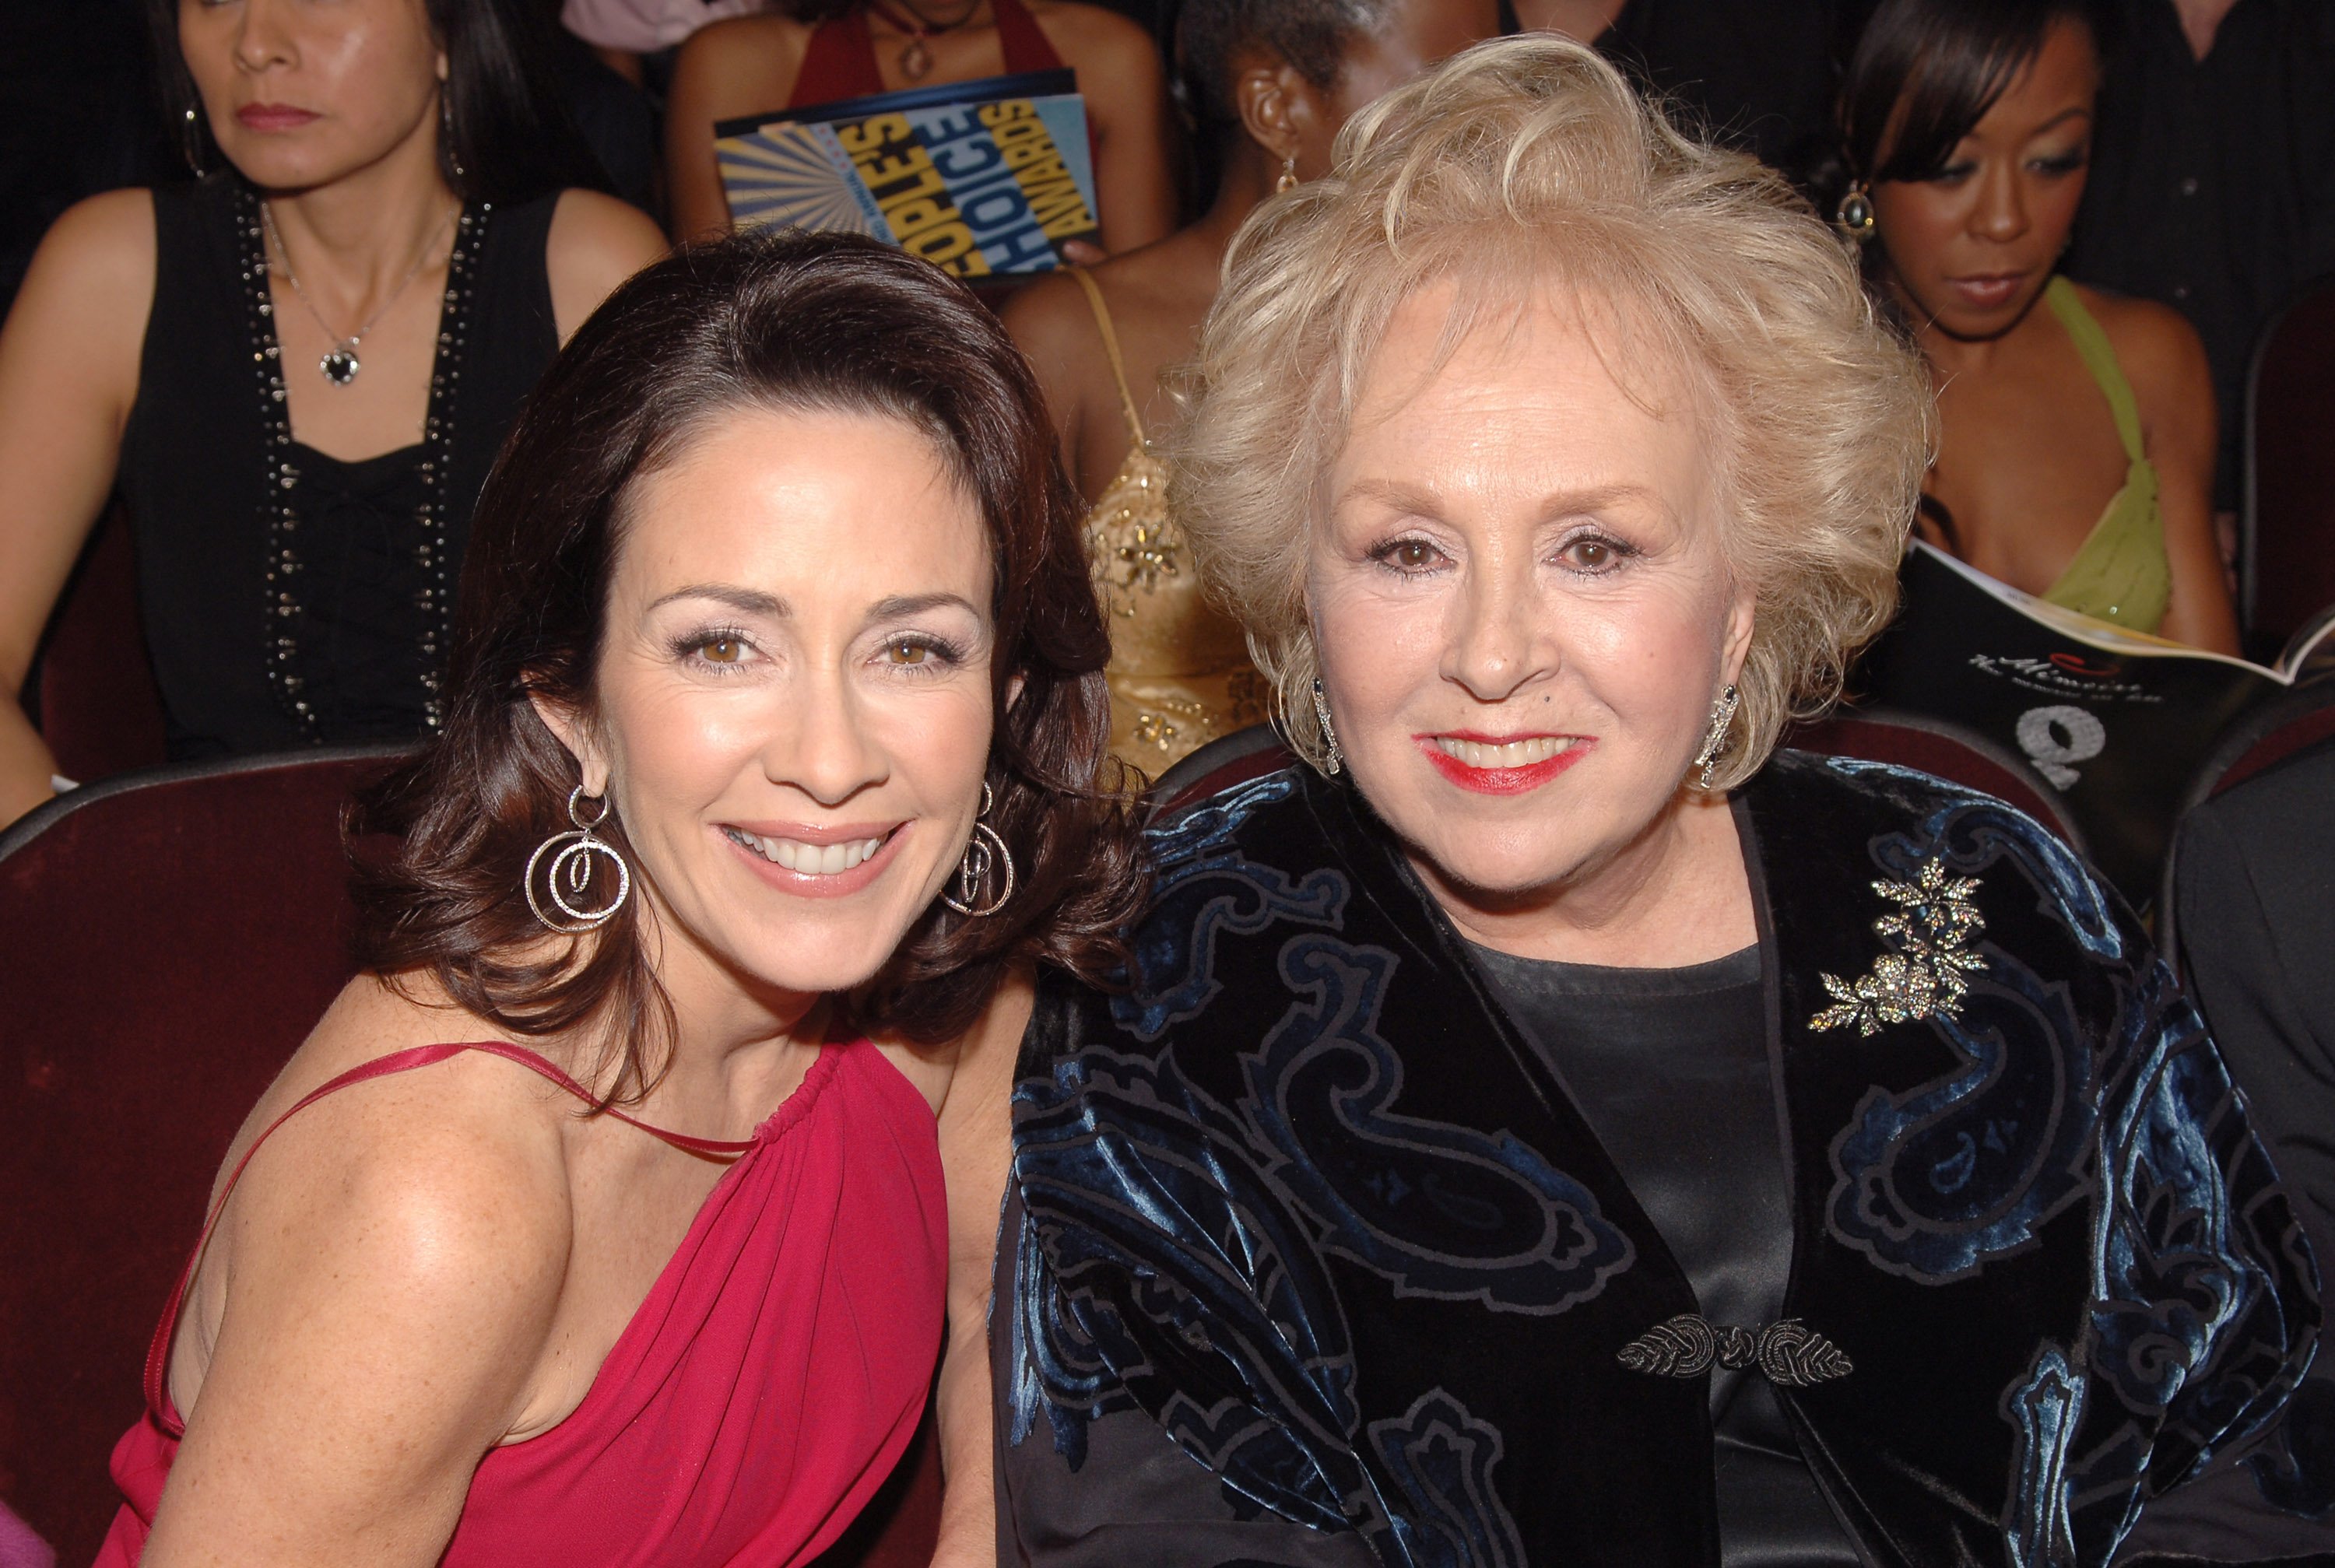 Patricia Heaton and Doris Roberts of 'Everybody Loves Raymond' pose for a photo